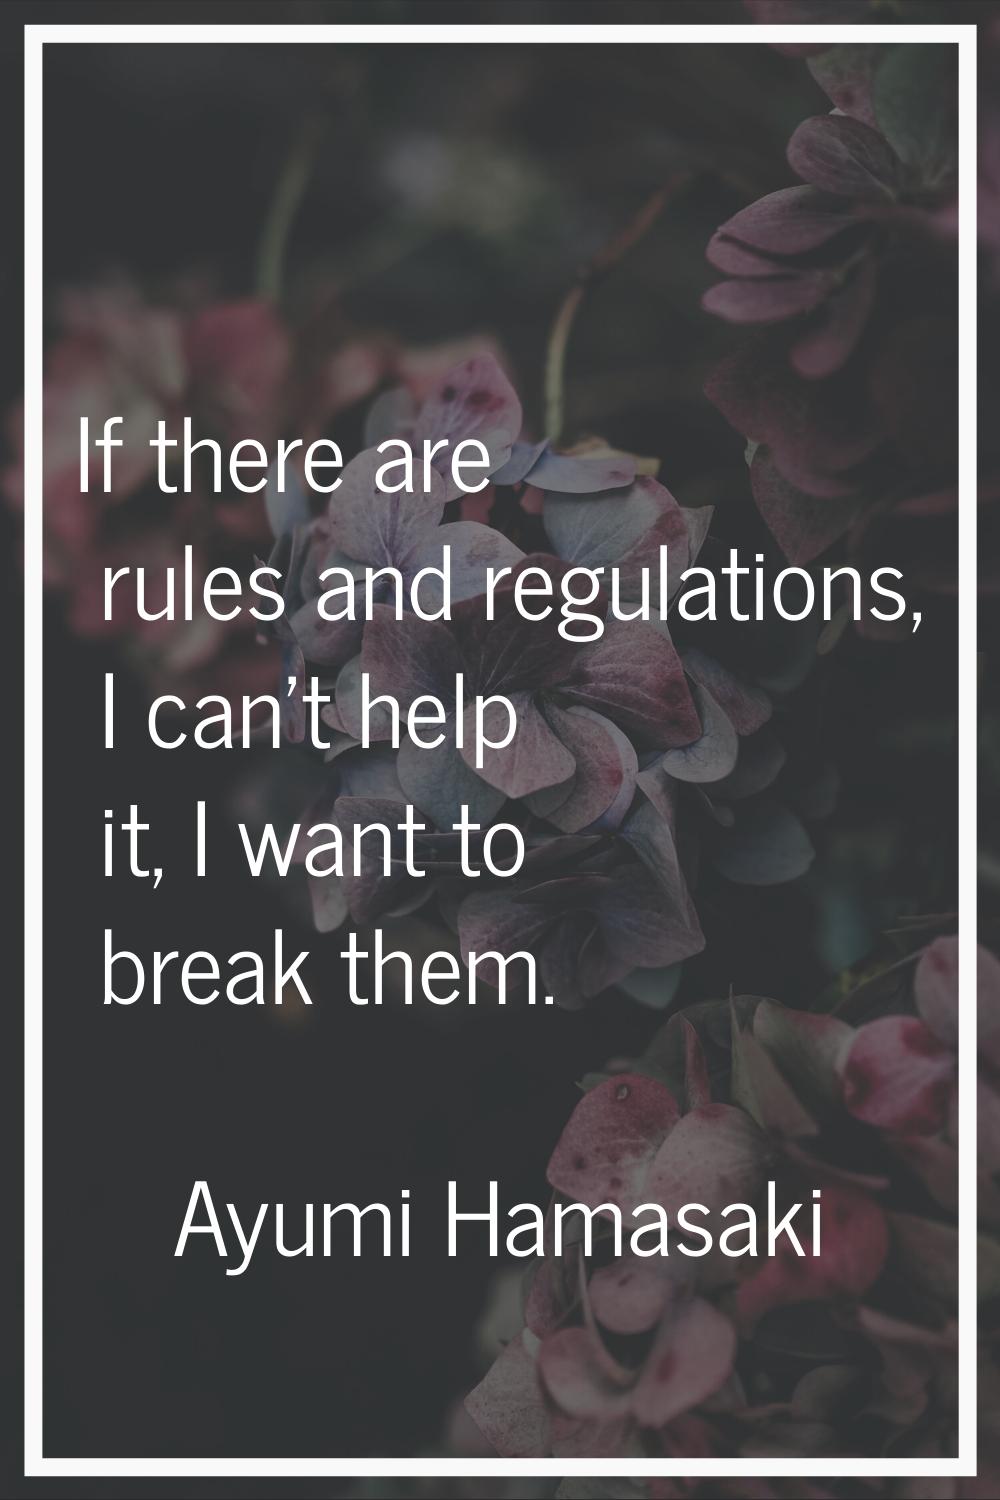 If there are rules and regulations, I can't help it, I want to break them.